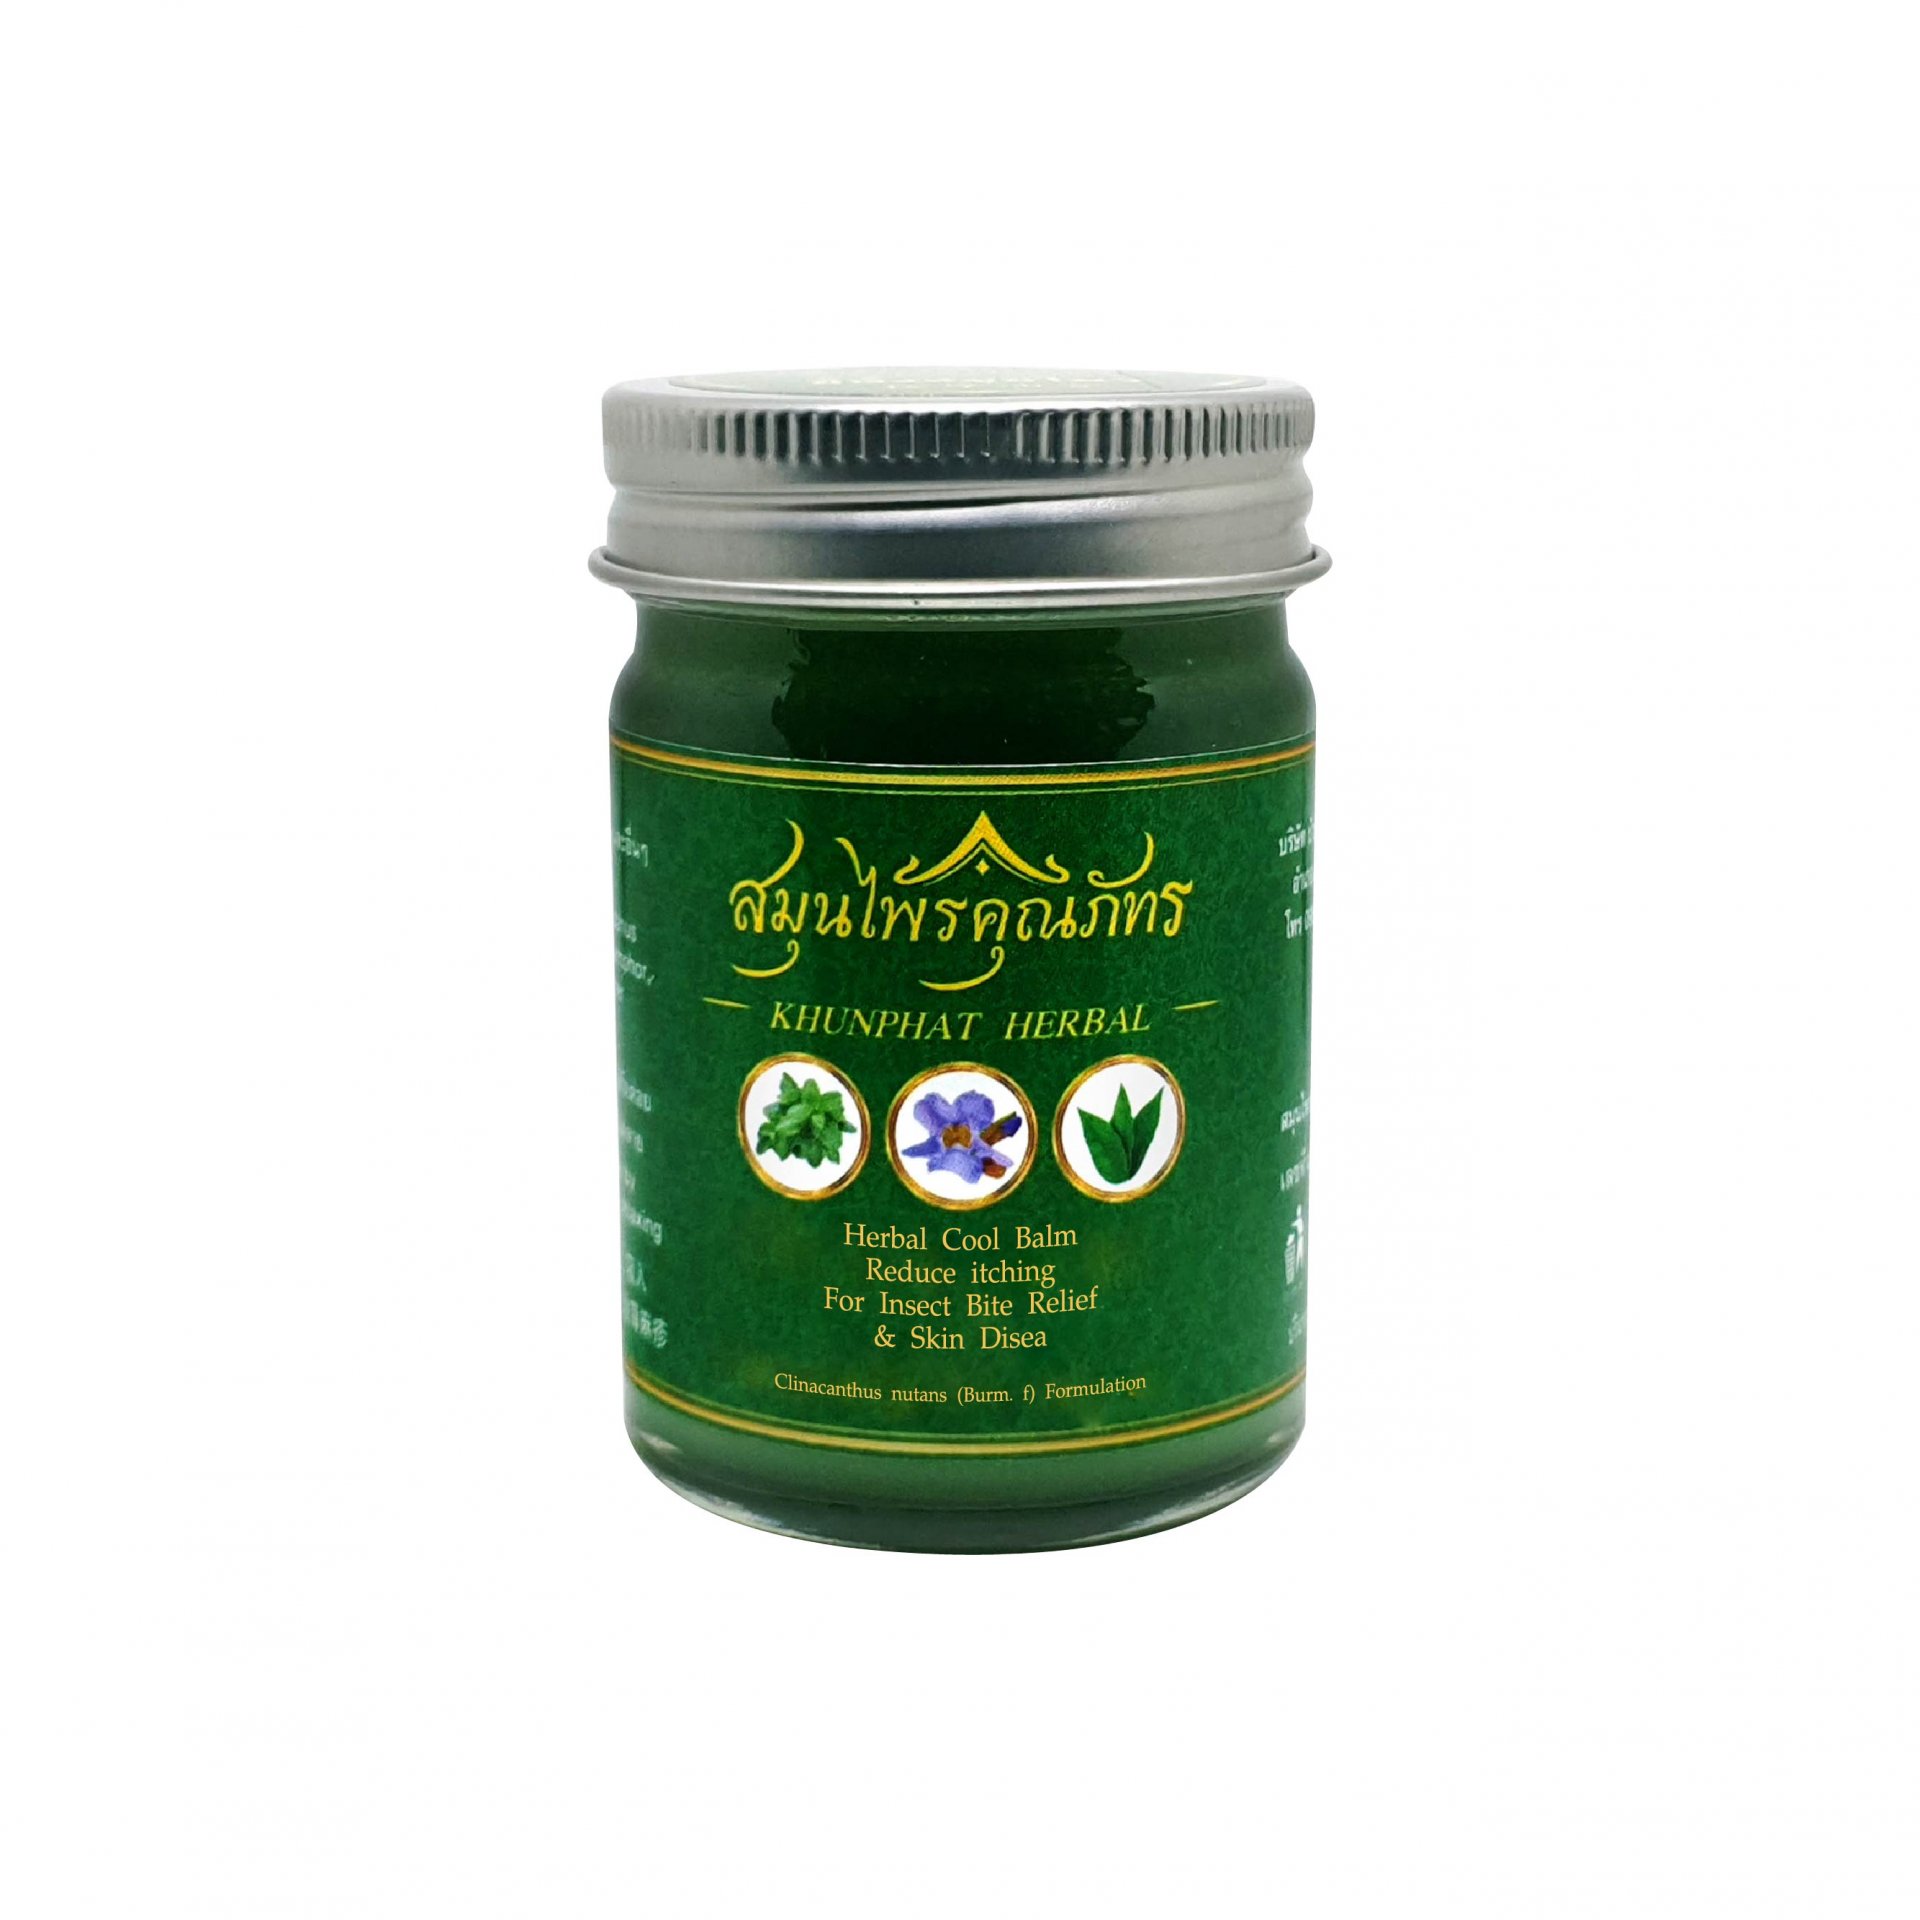 Herbal Moisturizing Balm Green Balm for anti-itching and insect bite relief